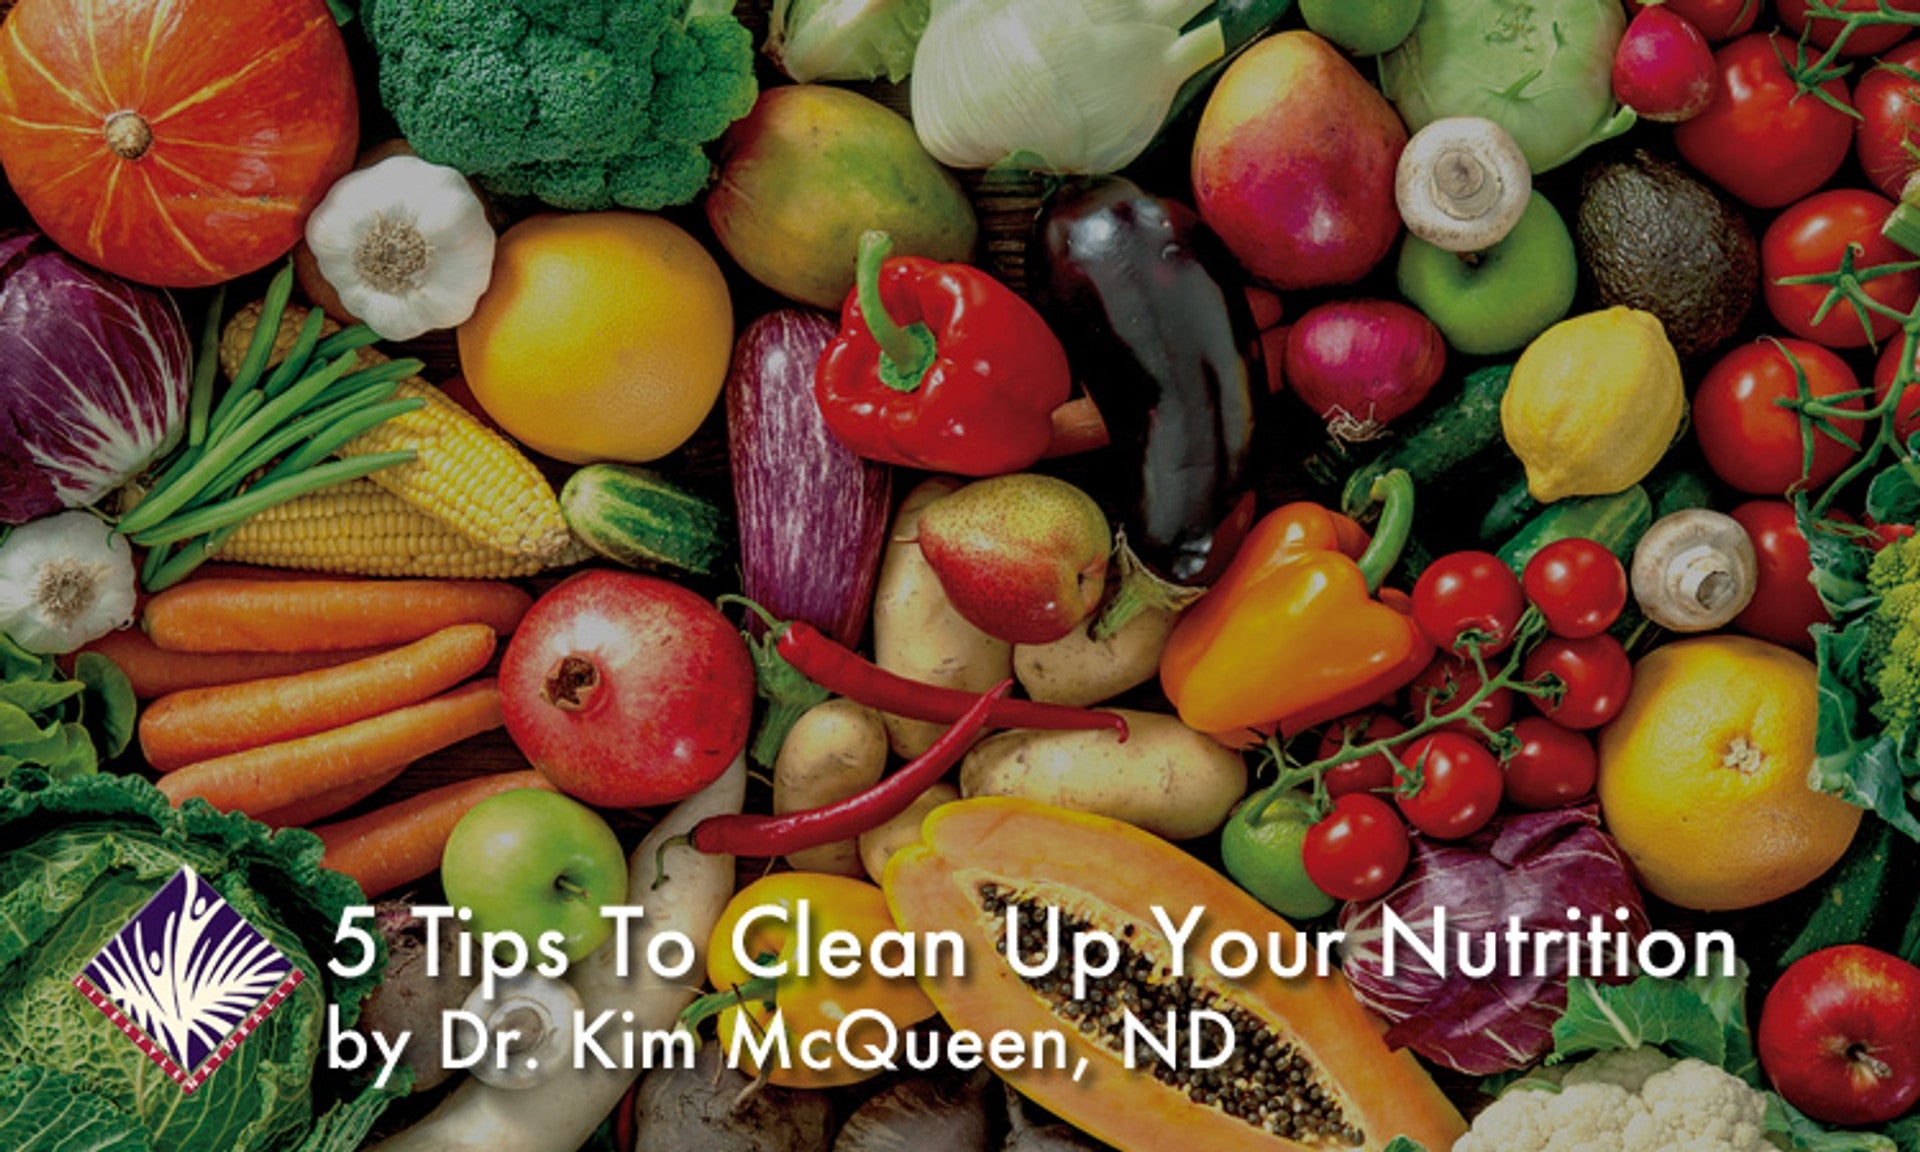 5 Tips to Clean Up Your Nutrition